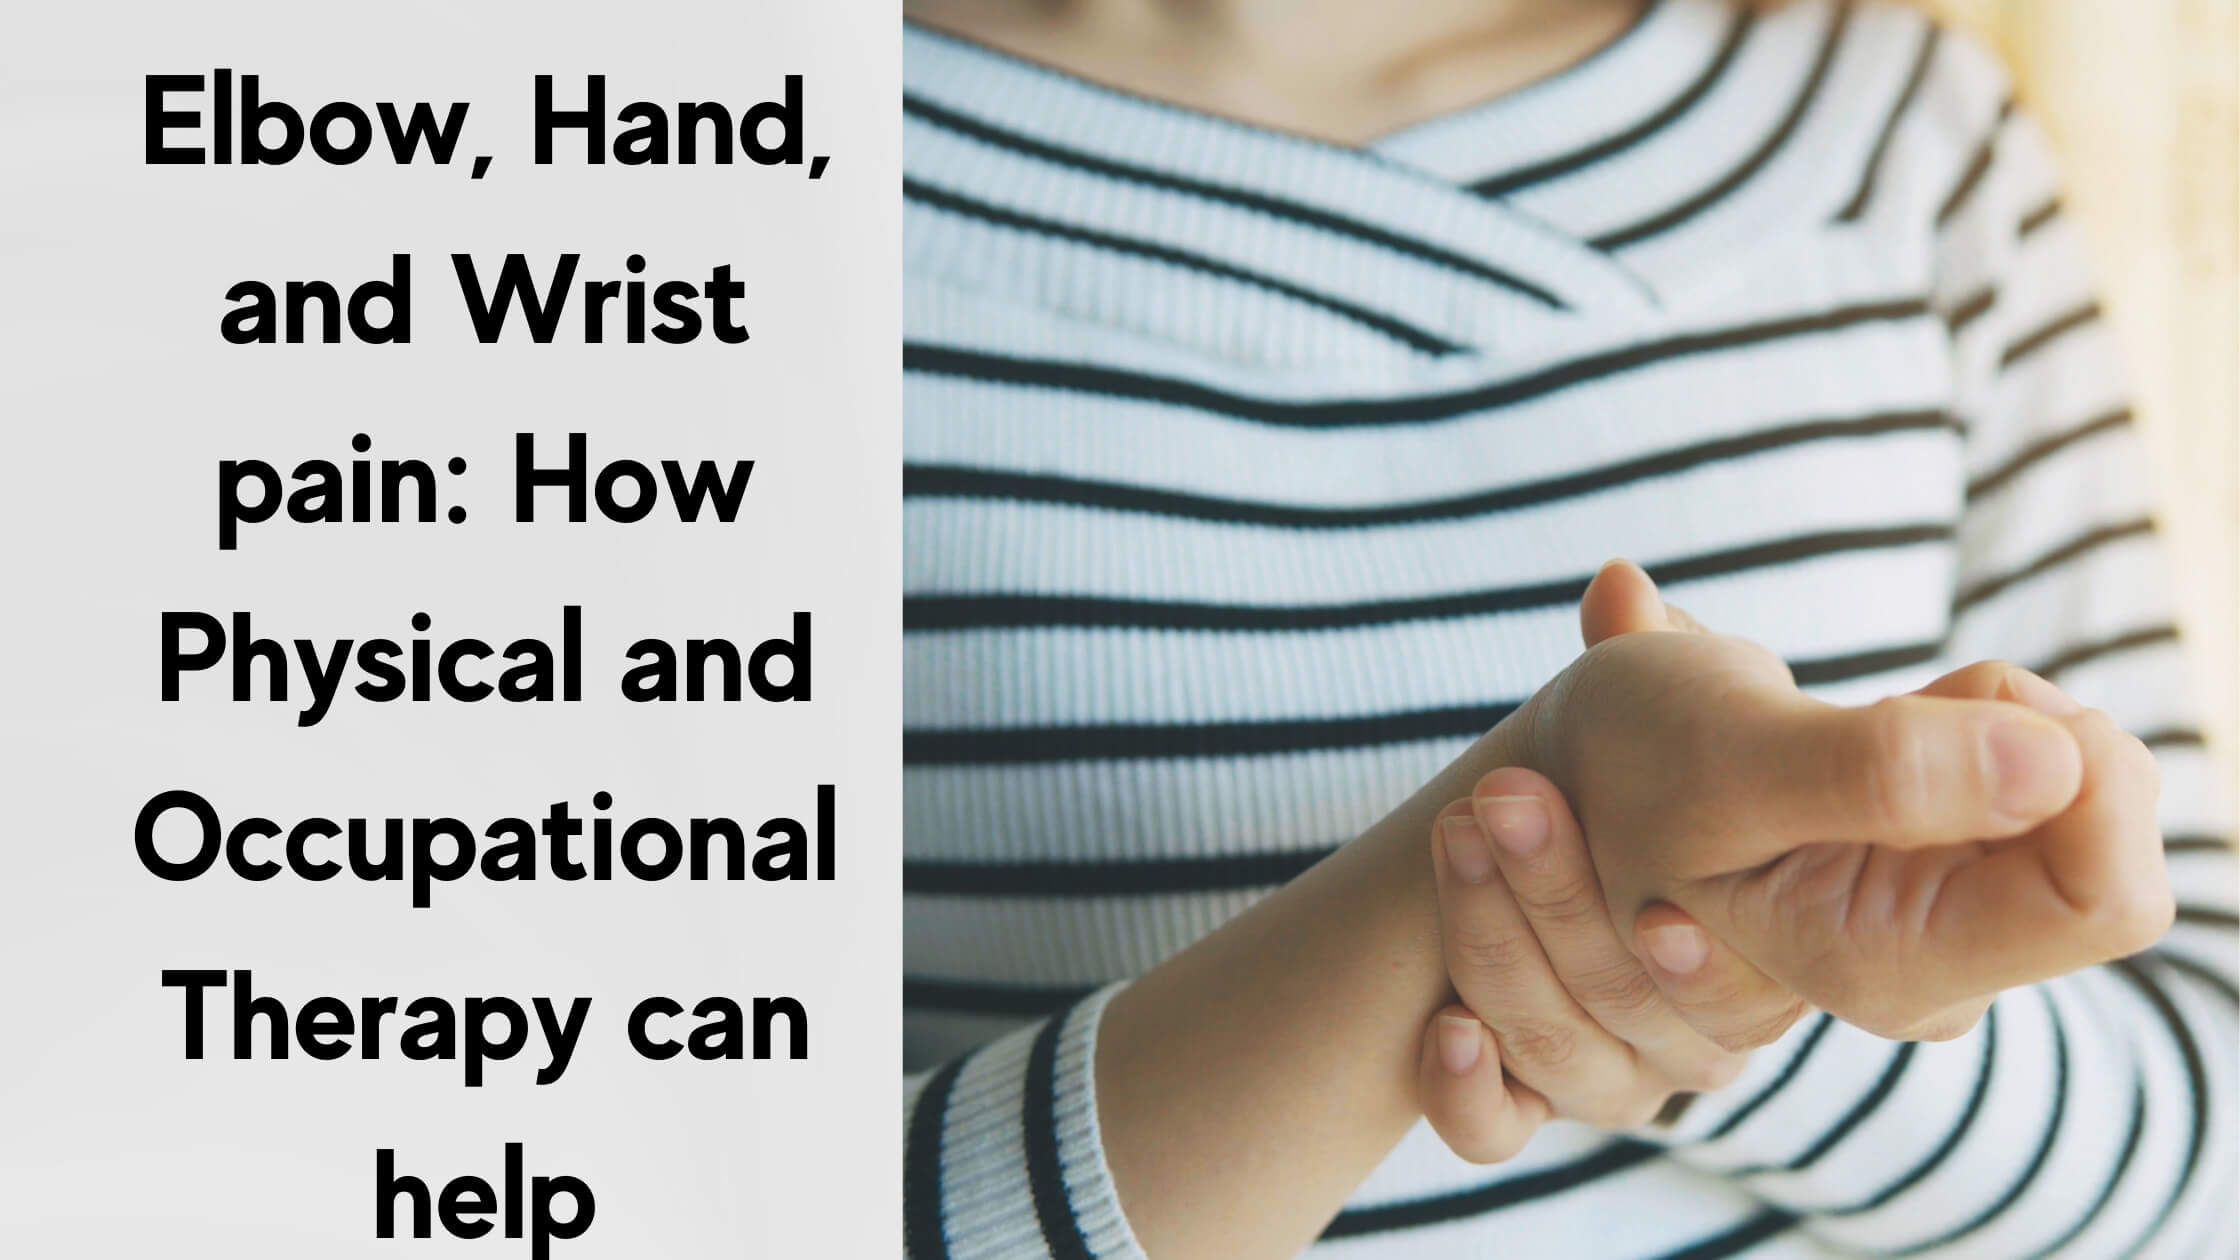 Where Can I Find Relief from Wrist Pain